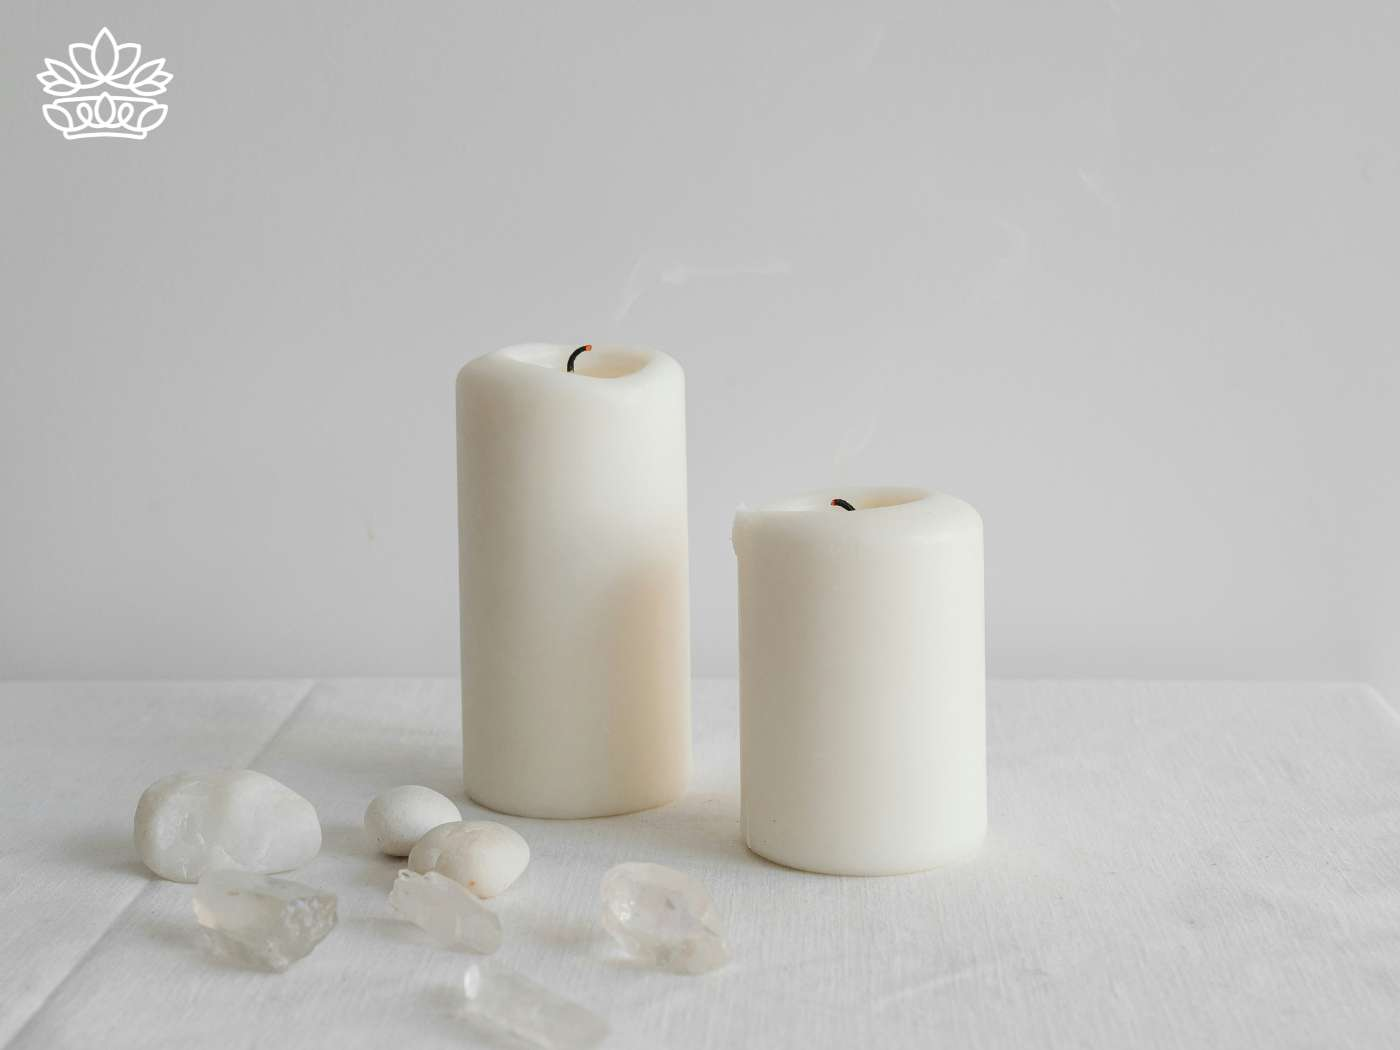 Two unlit ivory pillar candles accompanied by a scattering of translucent crystals on a clean white cloth, a minimalist addition to the Candles Collection - Fabulous Flowers and Gifts.